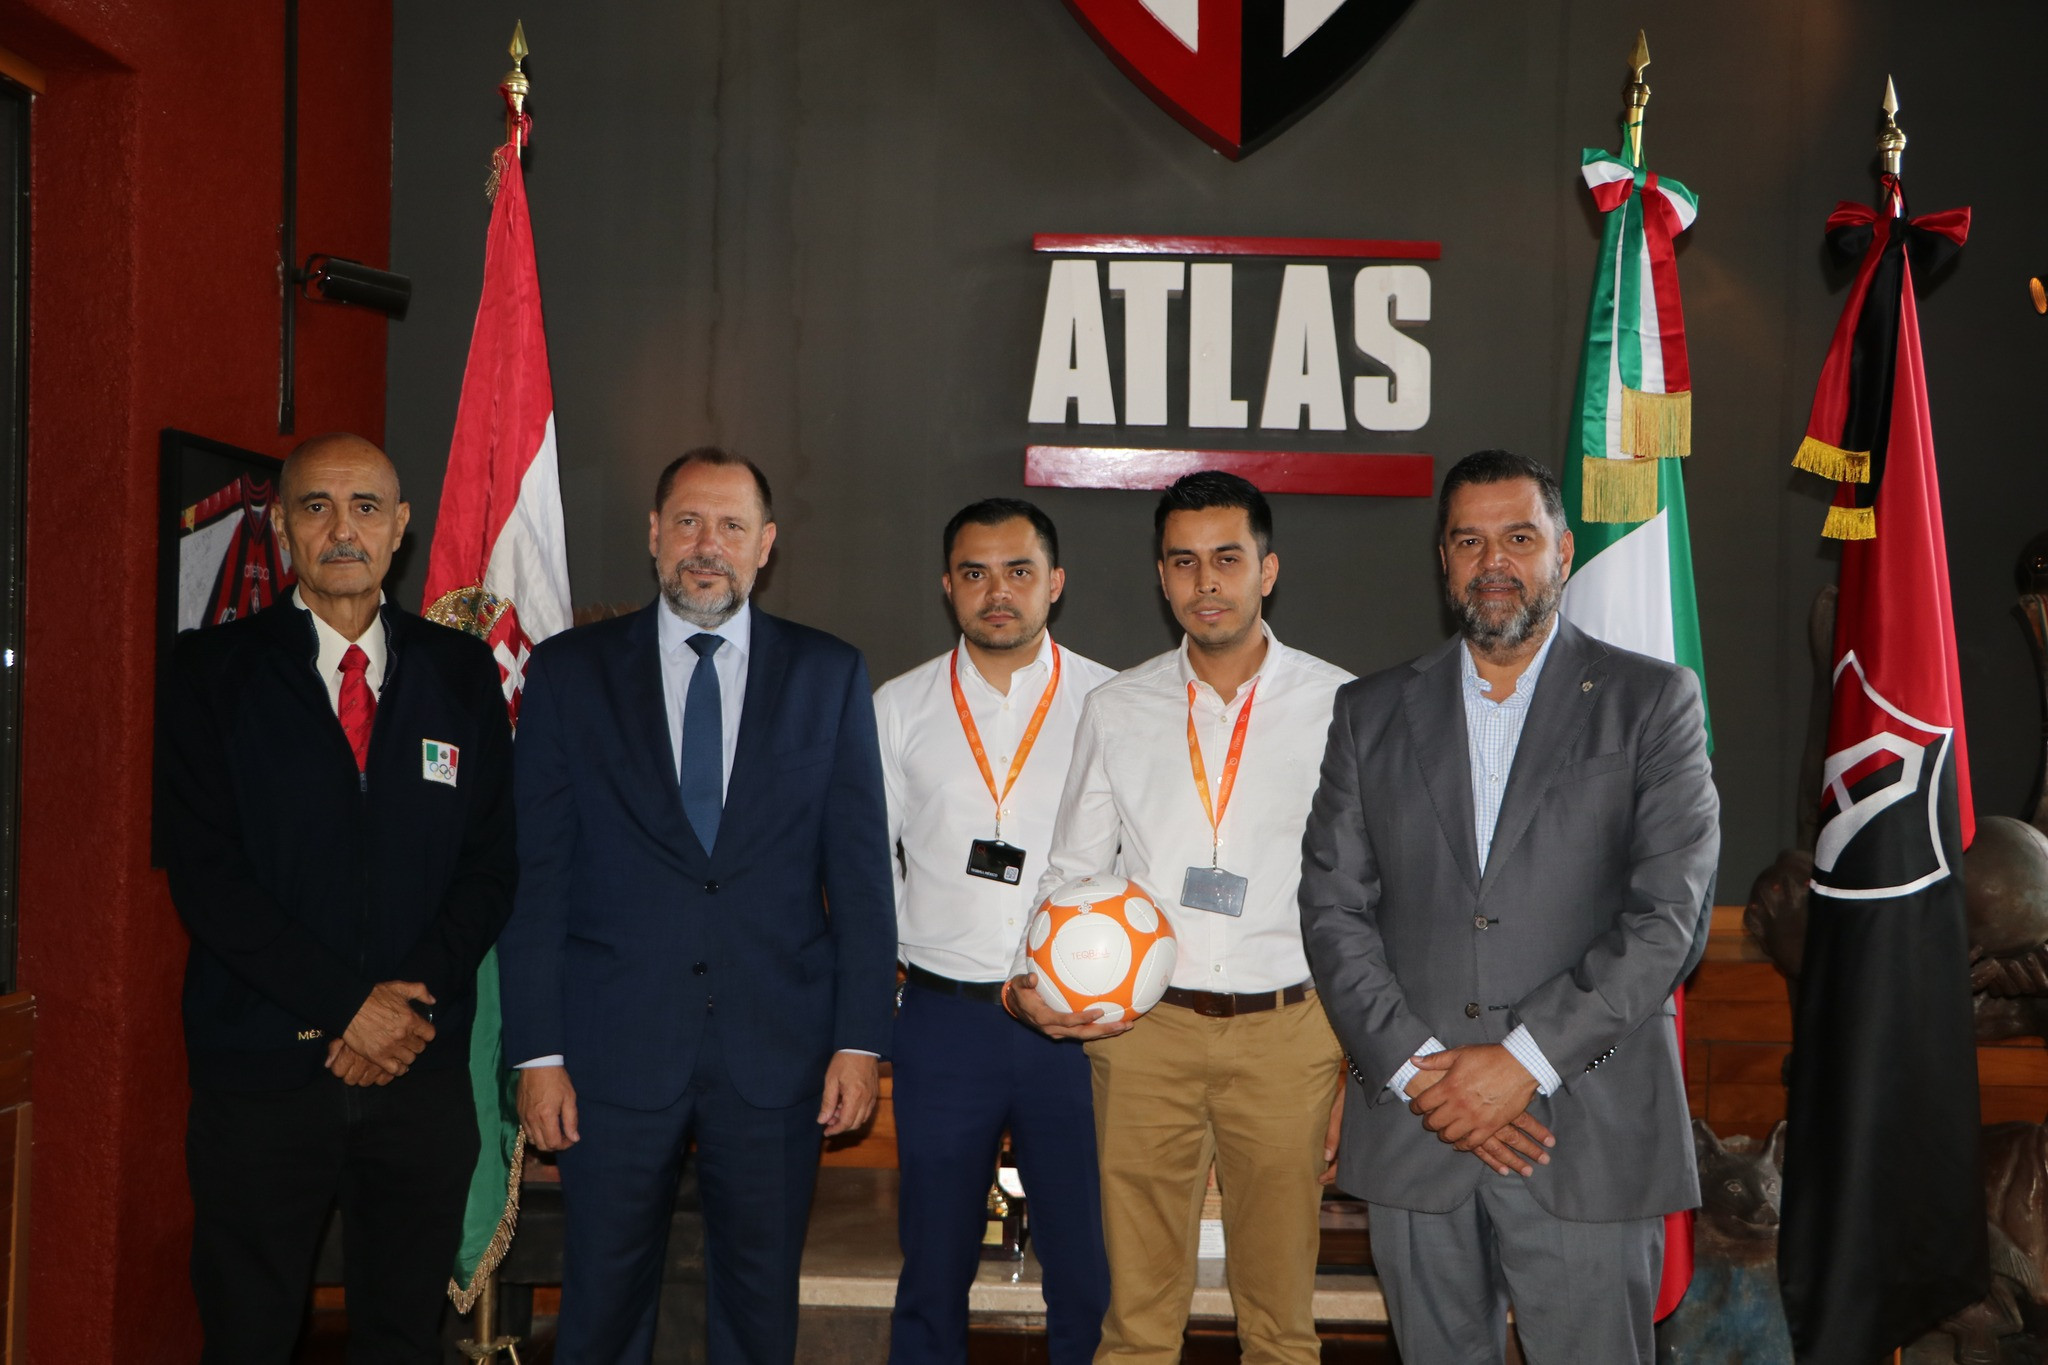 Football team Club Atlas hosted the teqball event in Mexico ©FITEQ